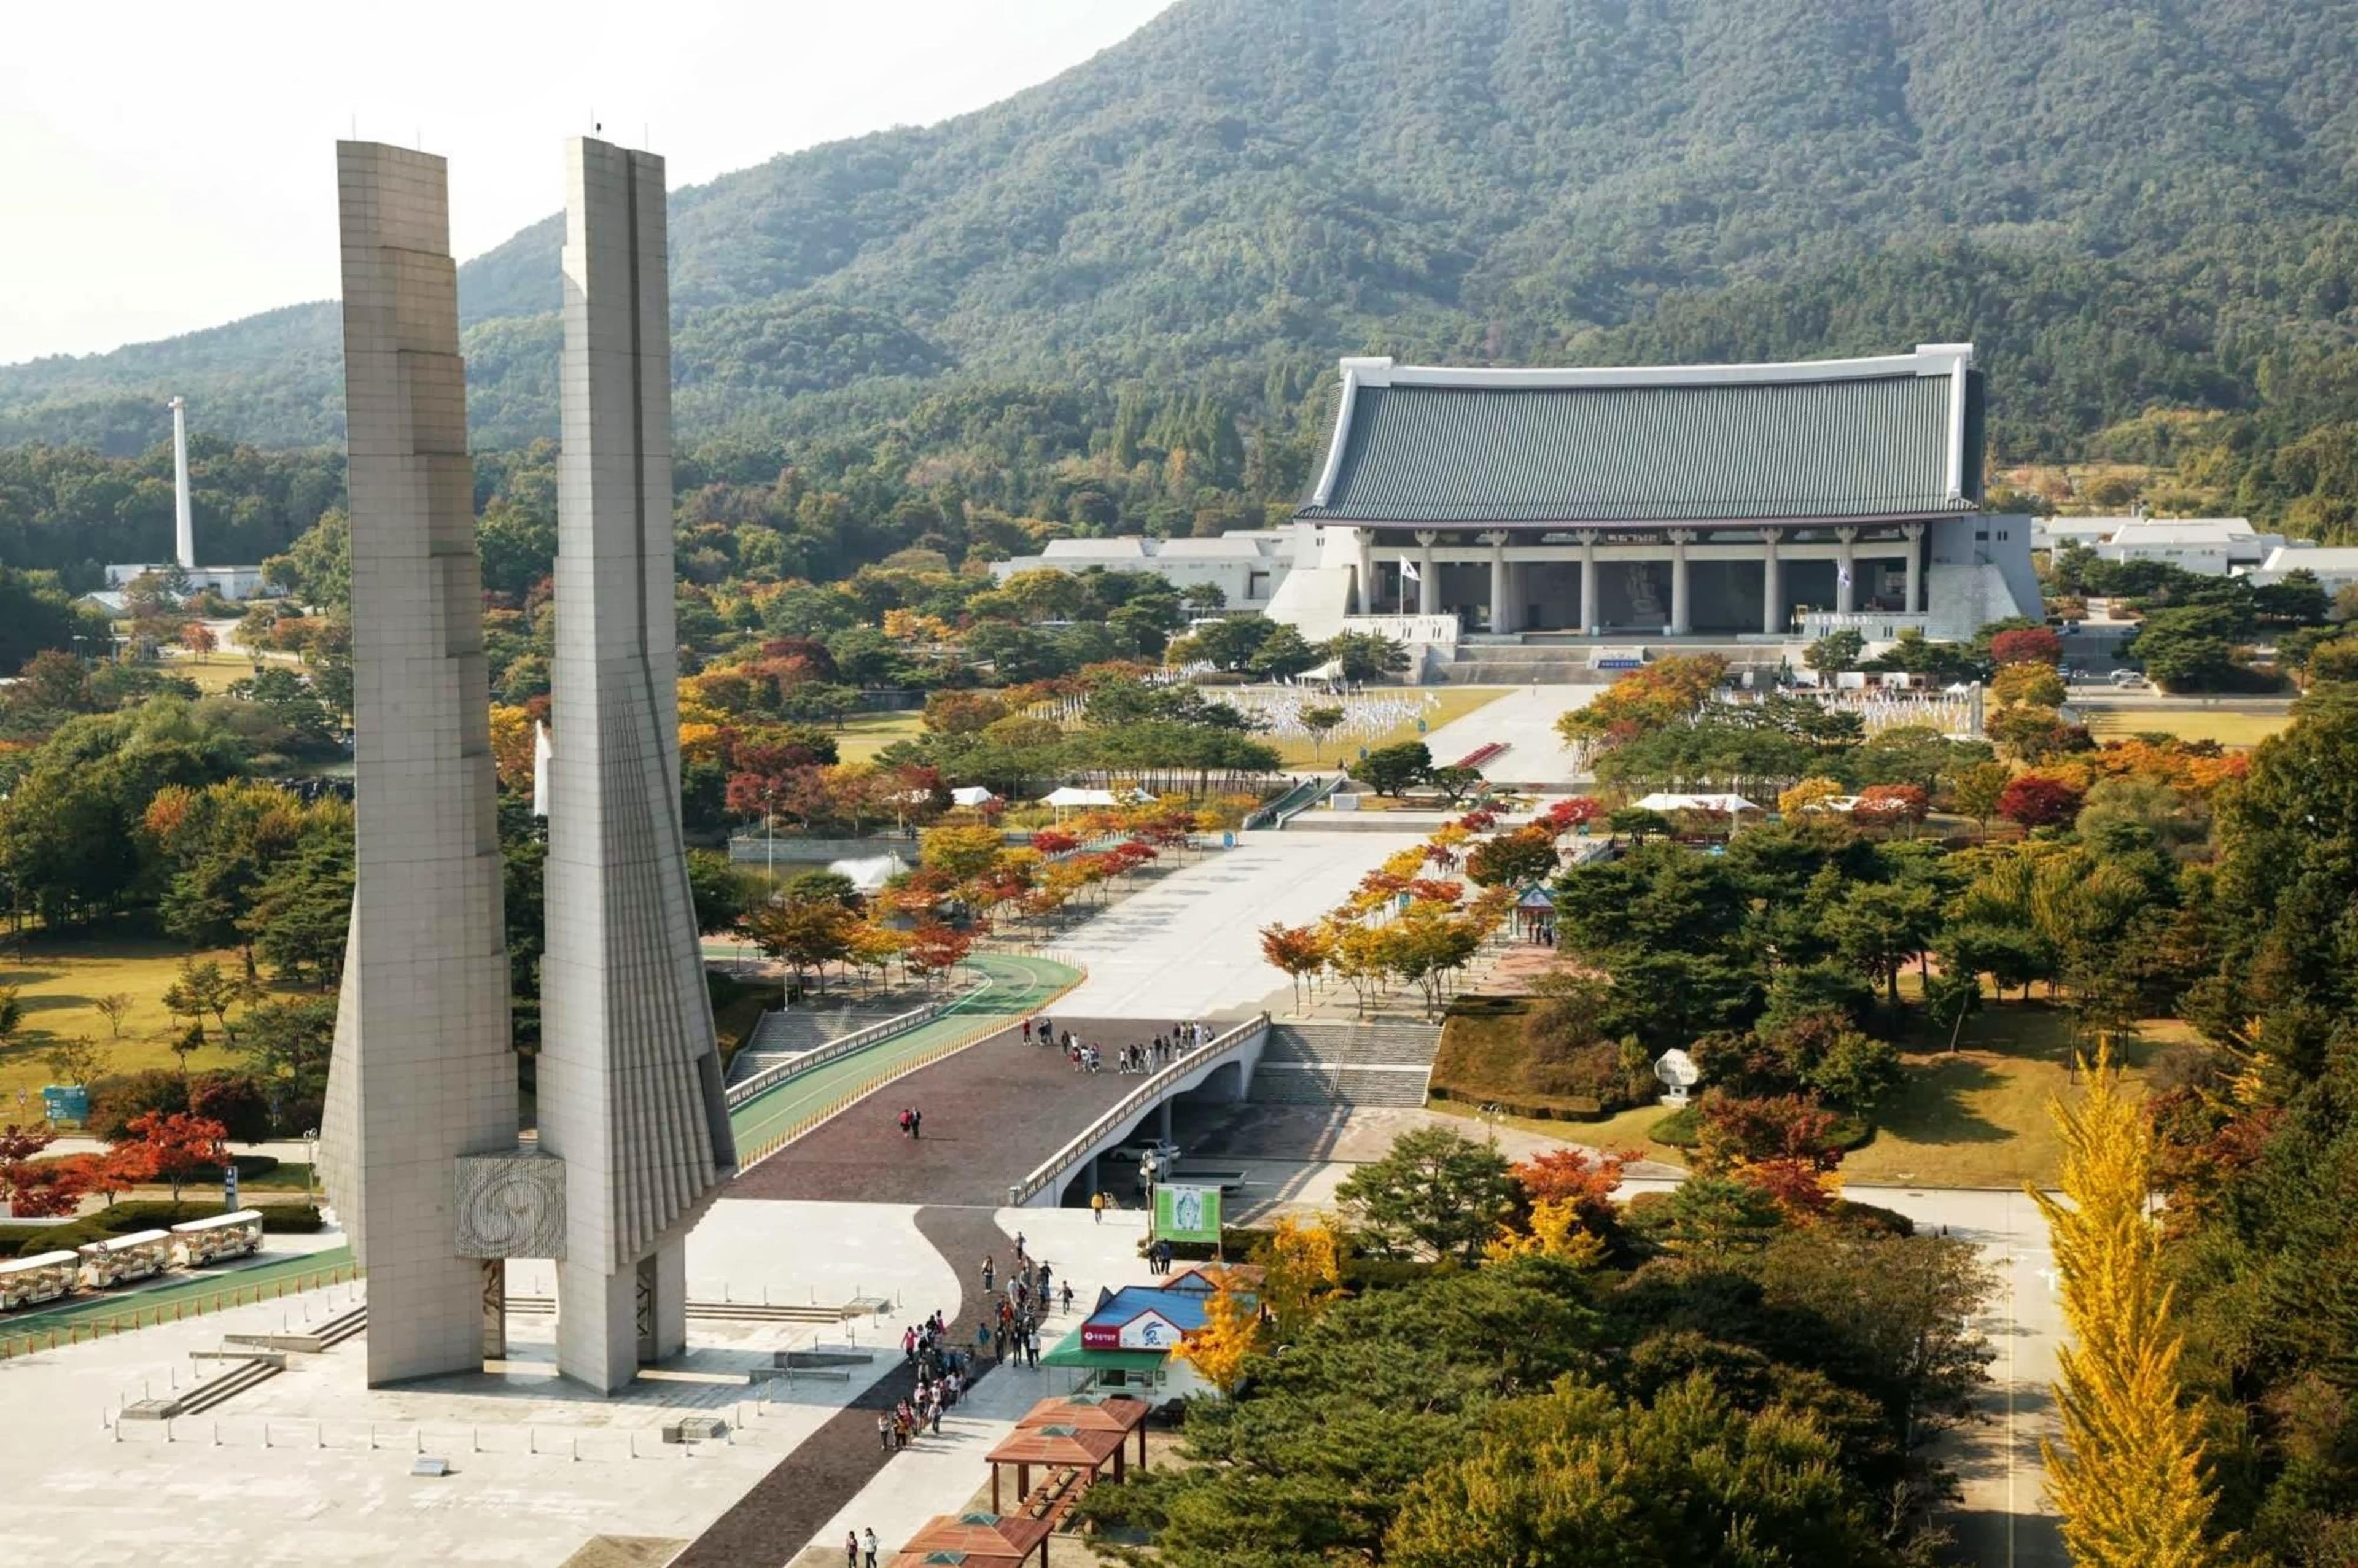 The Independence Hall of Korea